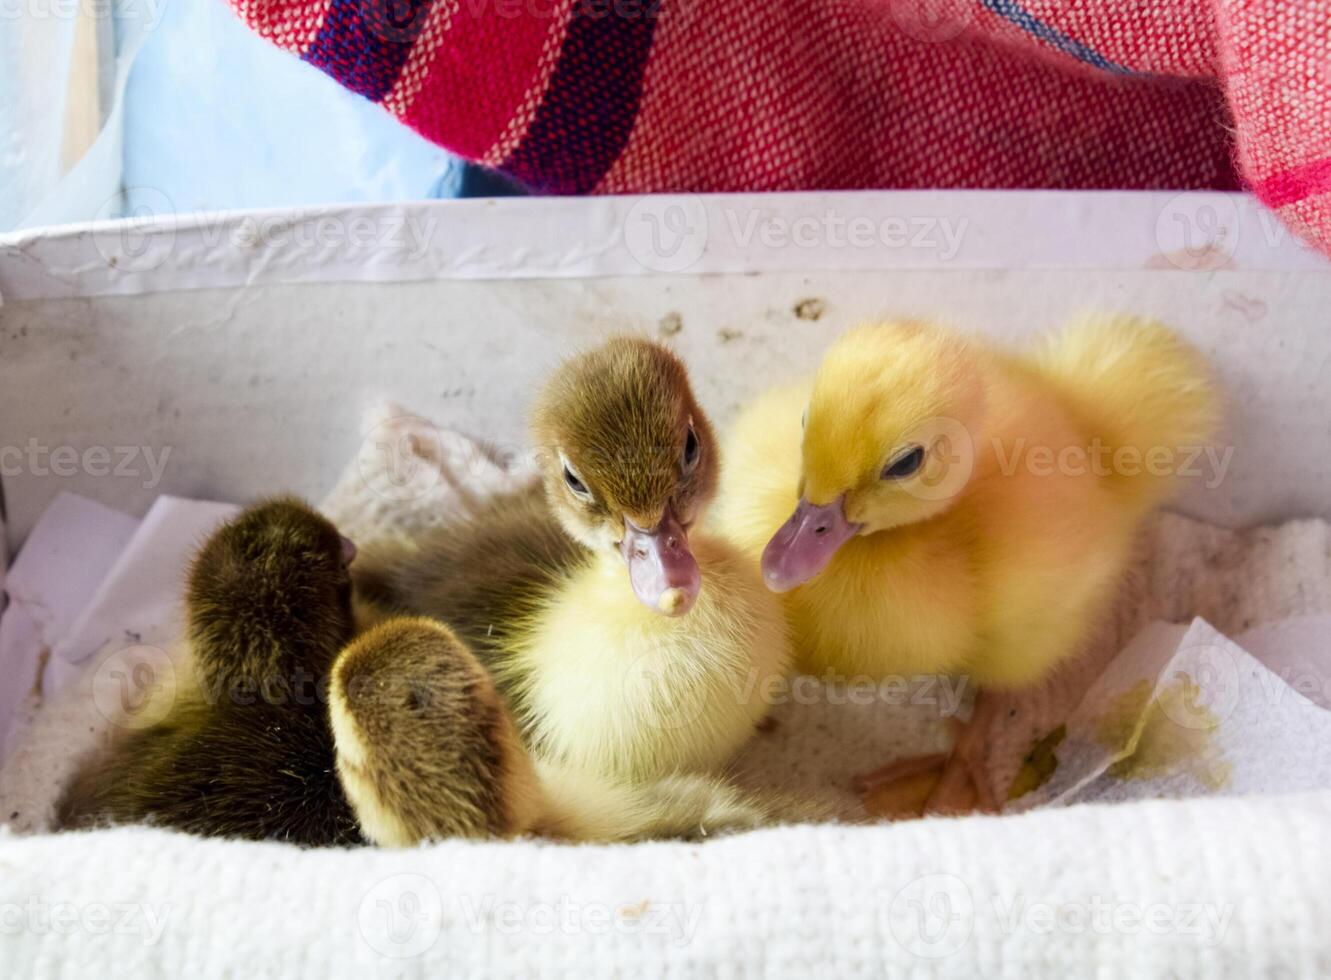 Ducklings of a musky duck photo